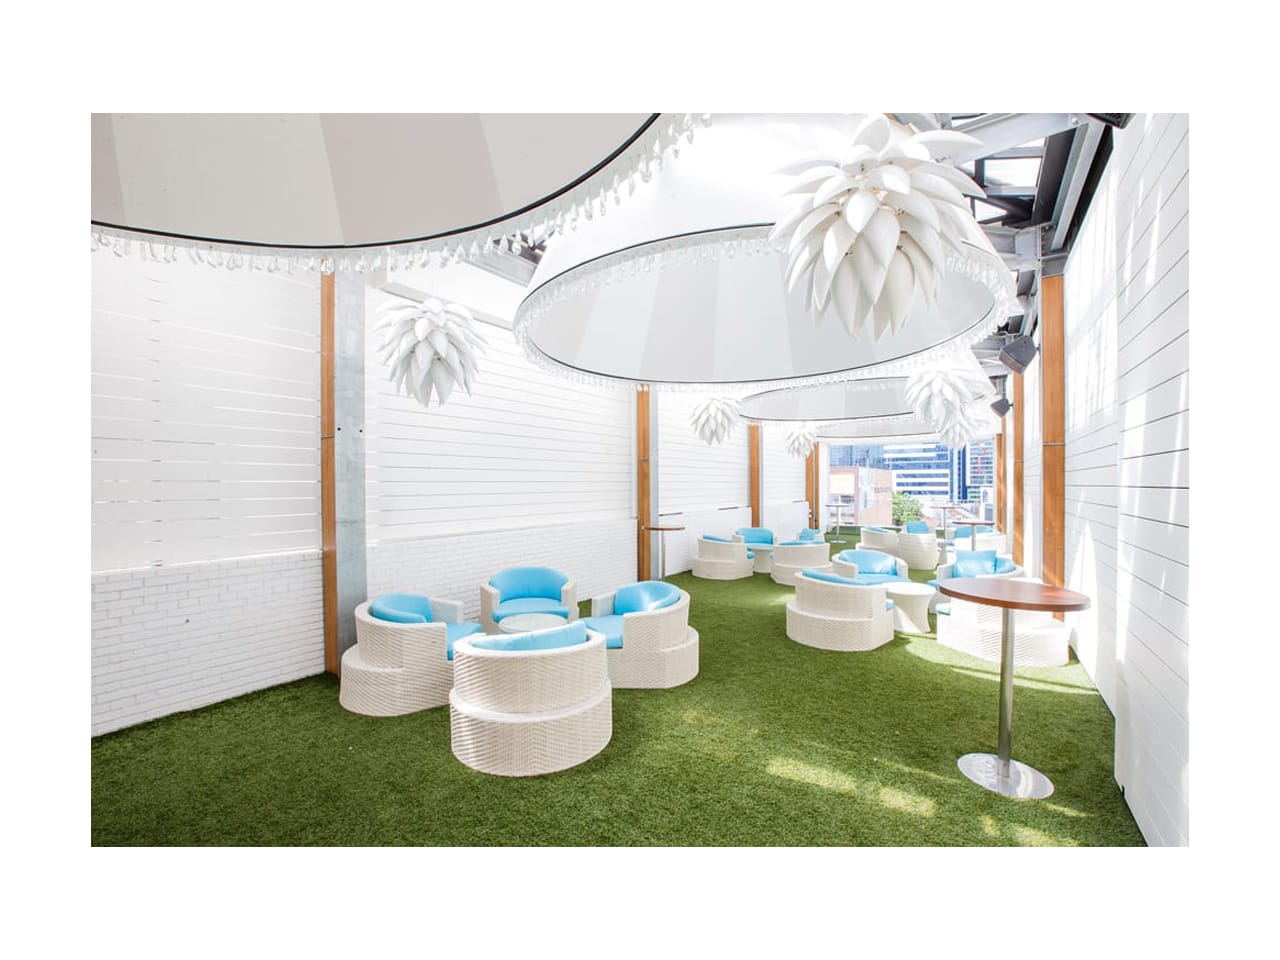 Semi-outdoor function room with white decor and blue and white individual seating with round tables and large overhead lighting